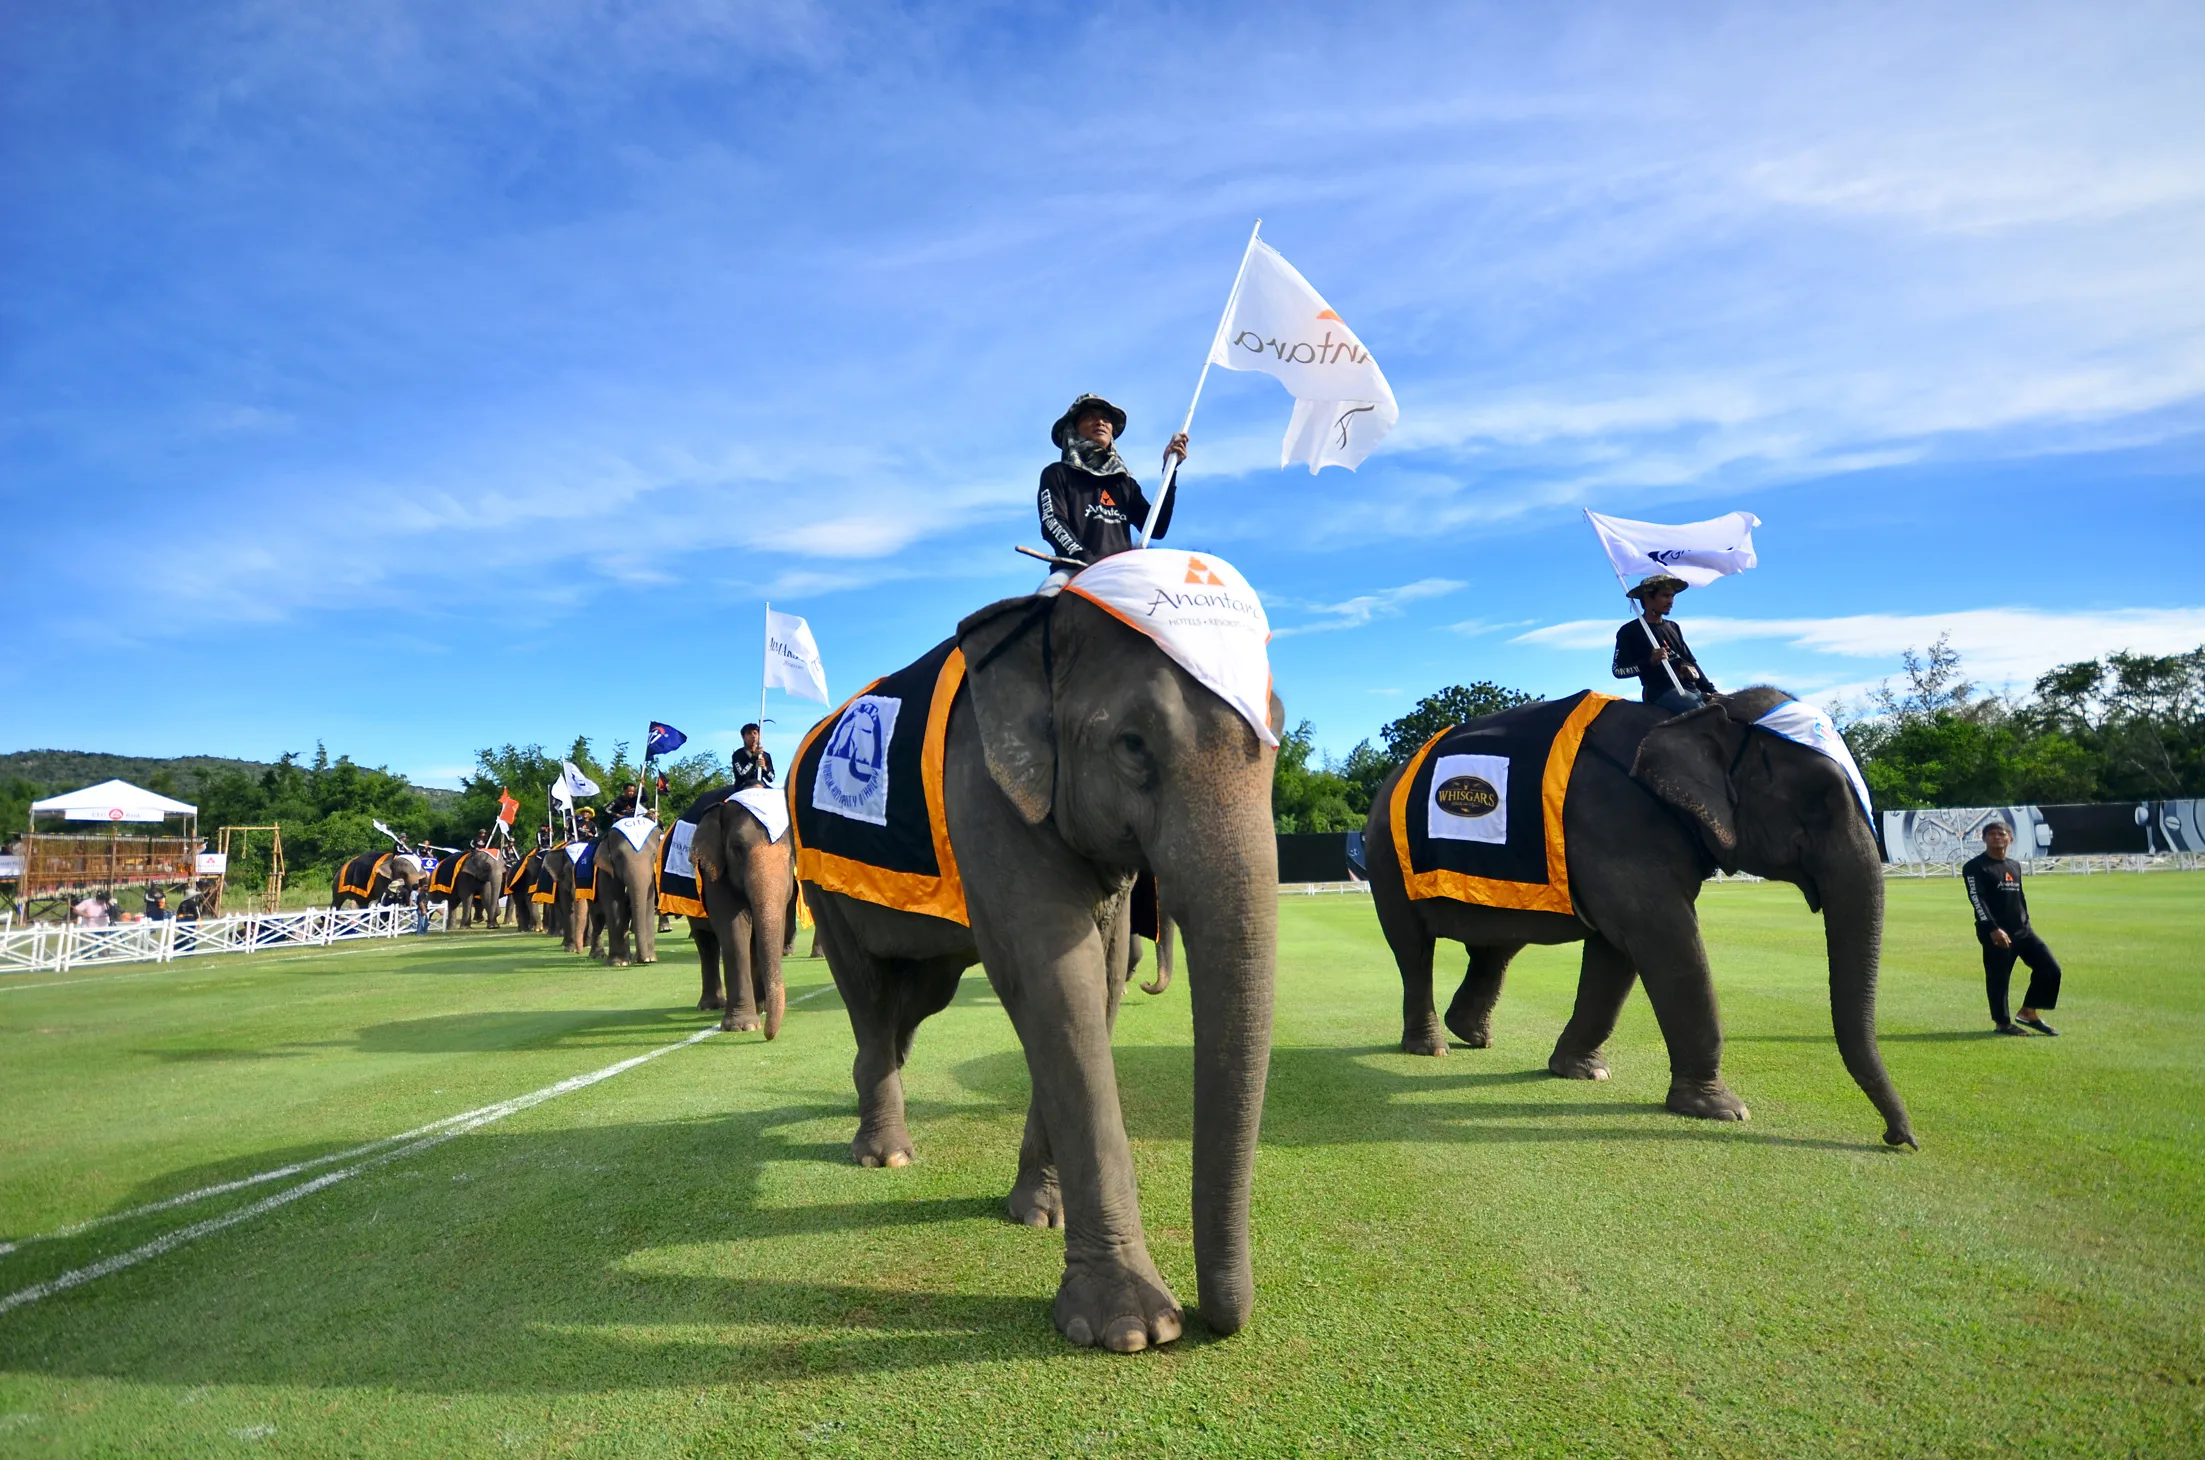 10-facts-about-kings-cup-elephant-polo-tournament